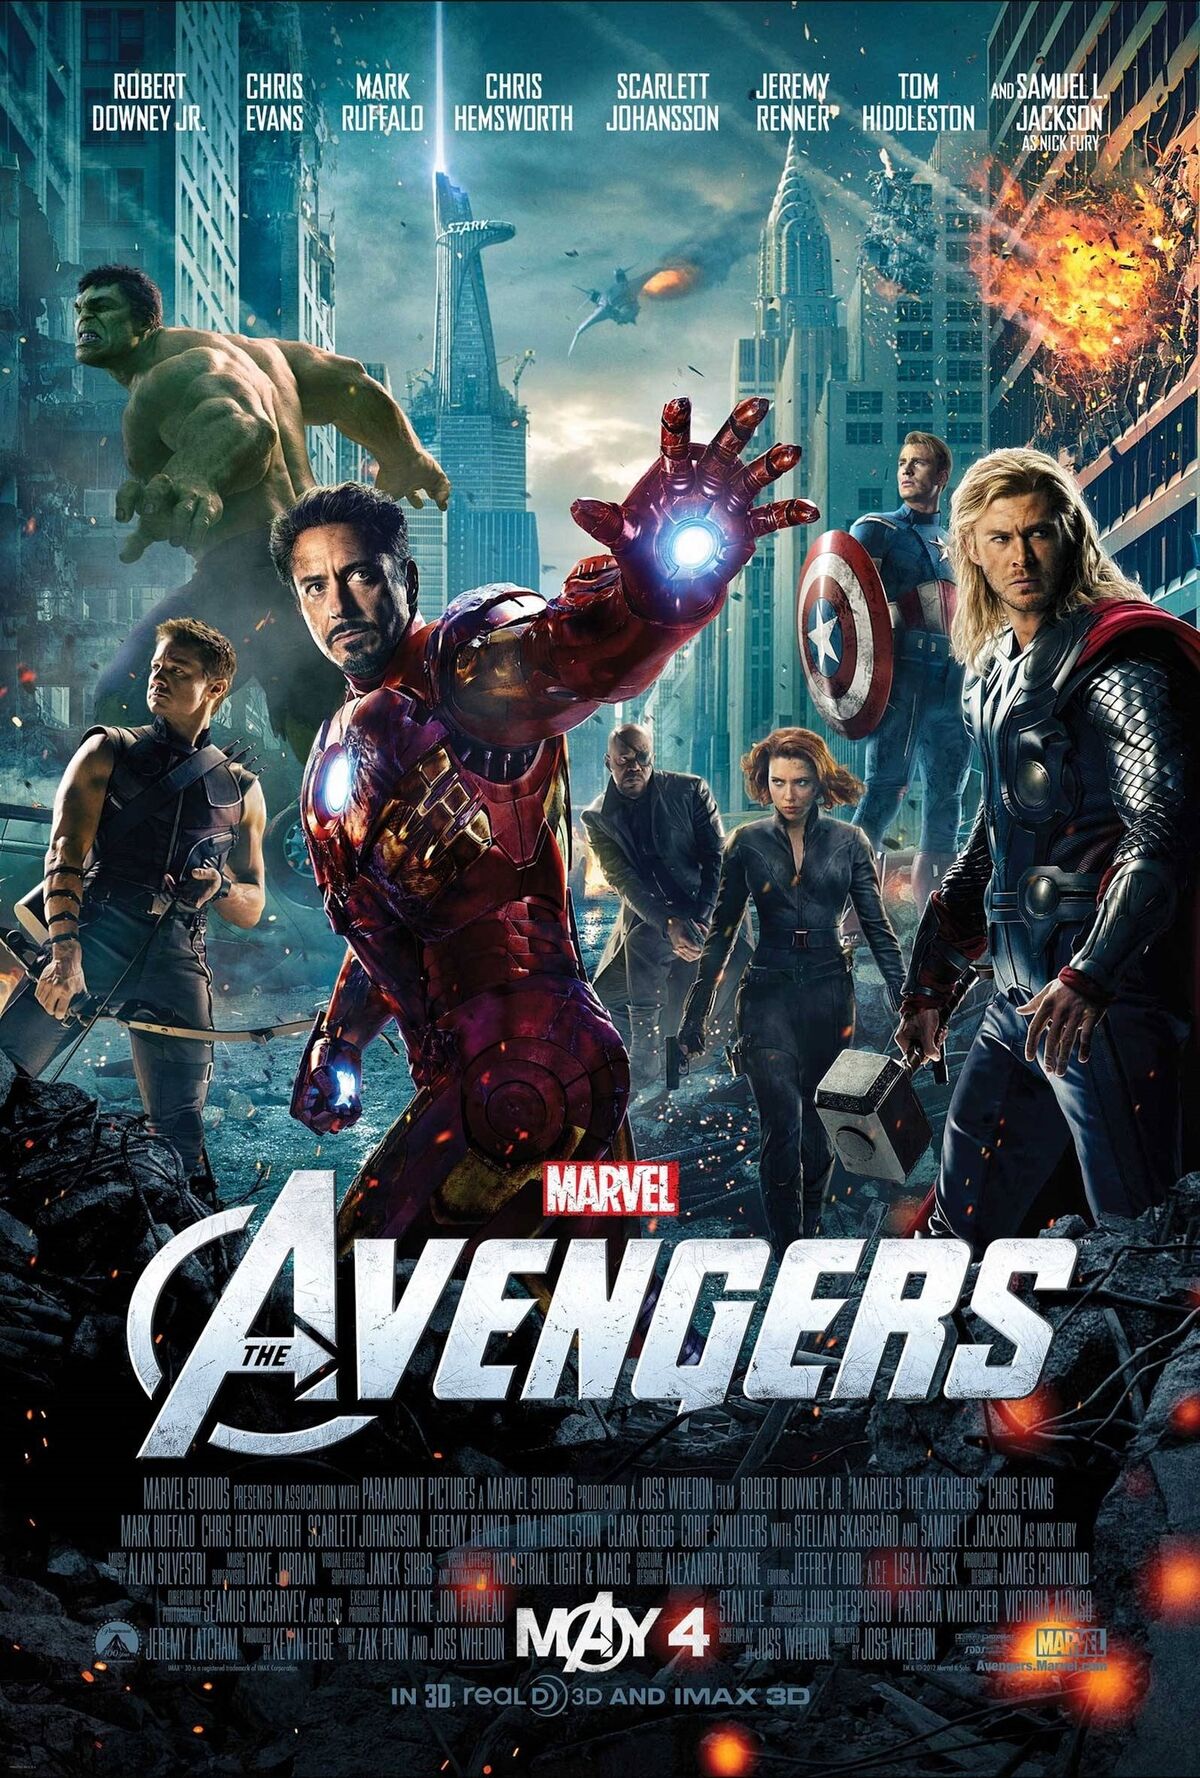 https://static.wikia.nocookie.net/captain-america/images/a/a9/The_Avengers_poster2.jpg/revision/latest/scale-to-width-down/1200?cb=20140206021928